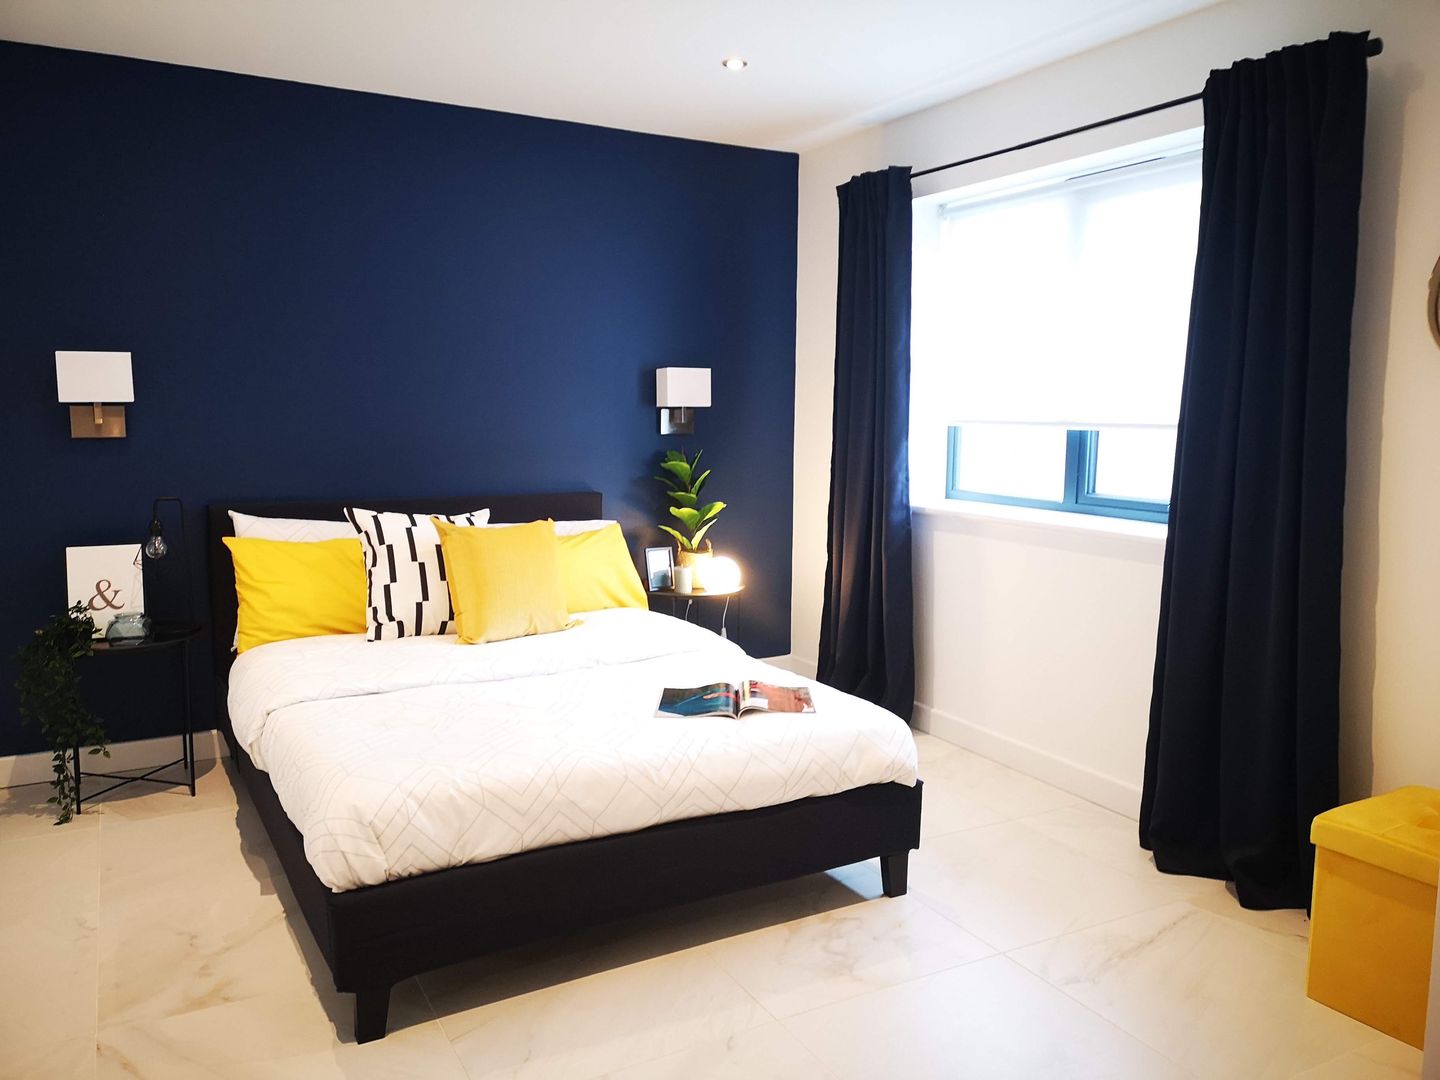 Contrasting navy bedroom THE FRESH INTERIOR COMPANY Małe sypialnie Marmur Dulux sapphire salute mustard accessories Ikea curtains marble tiled floor